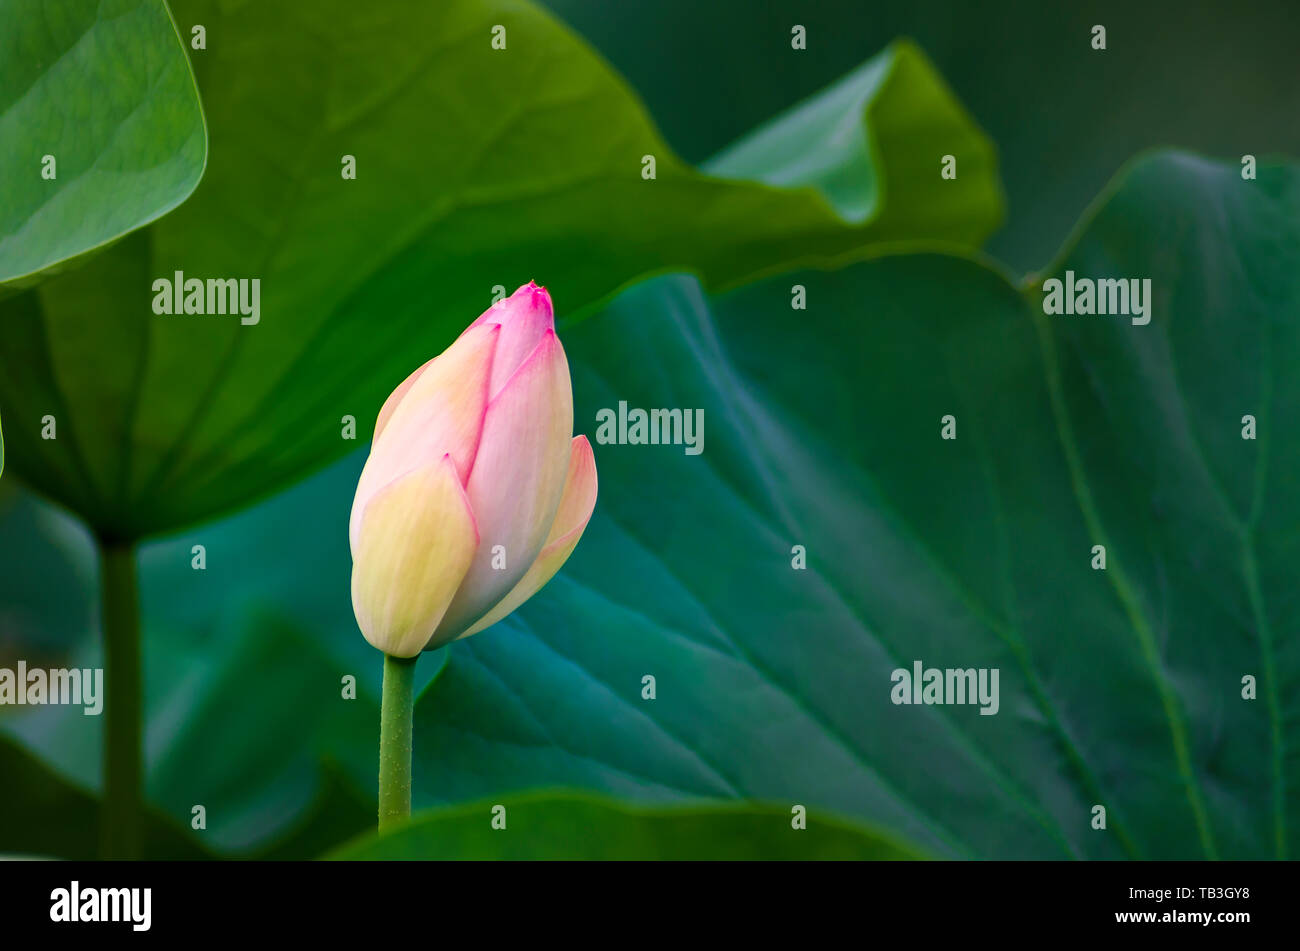 Blooming lotus flower bud and green leaves Stock Photo